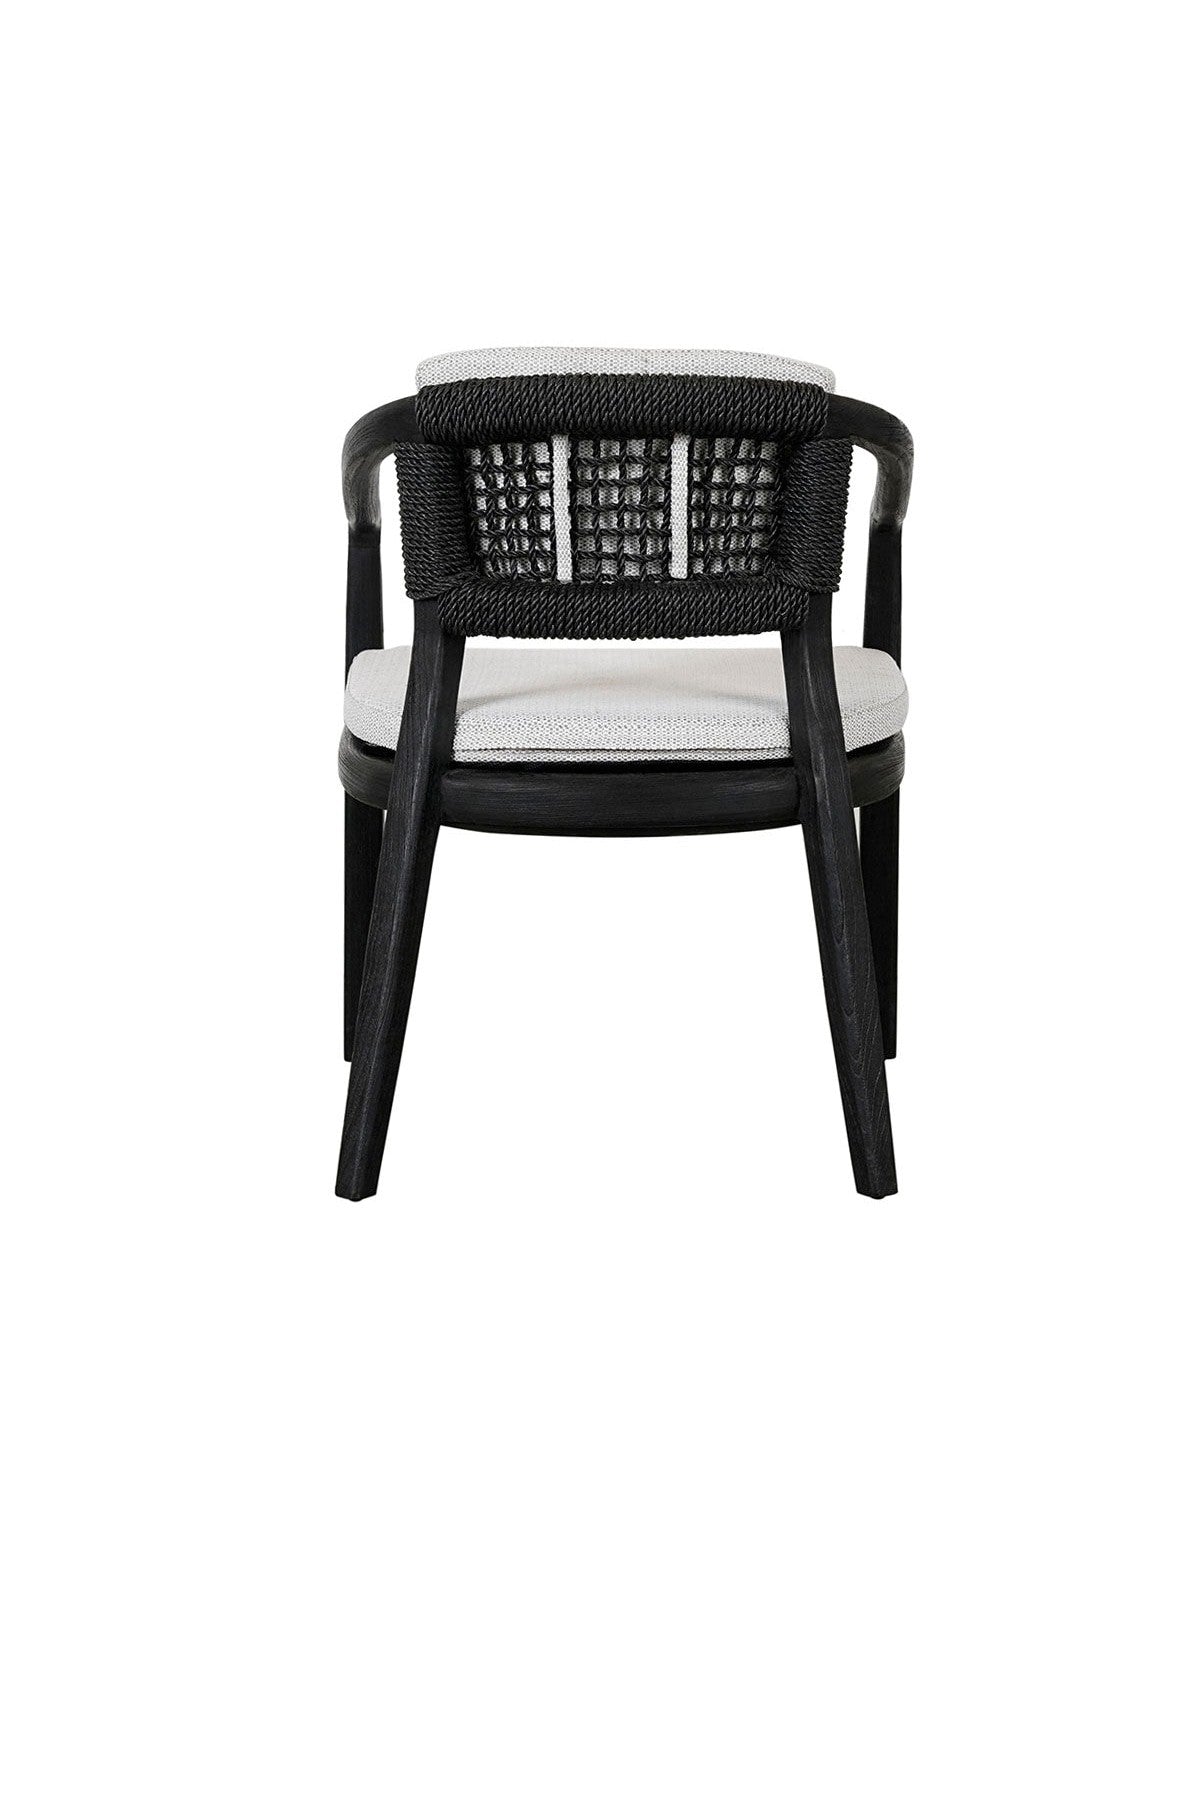 Hanson Outdoor Dining Chair - 2 Colors